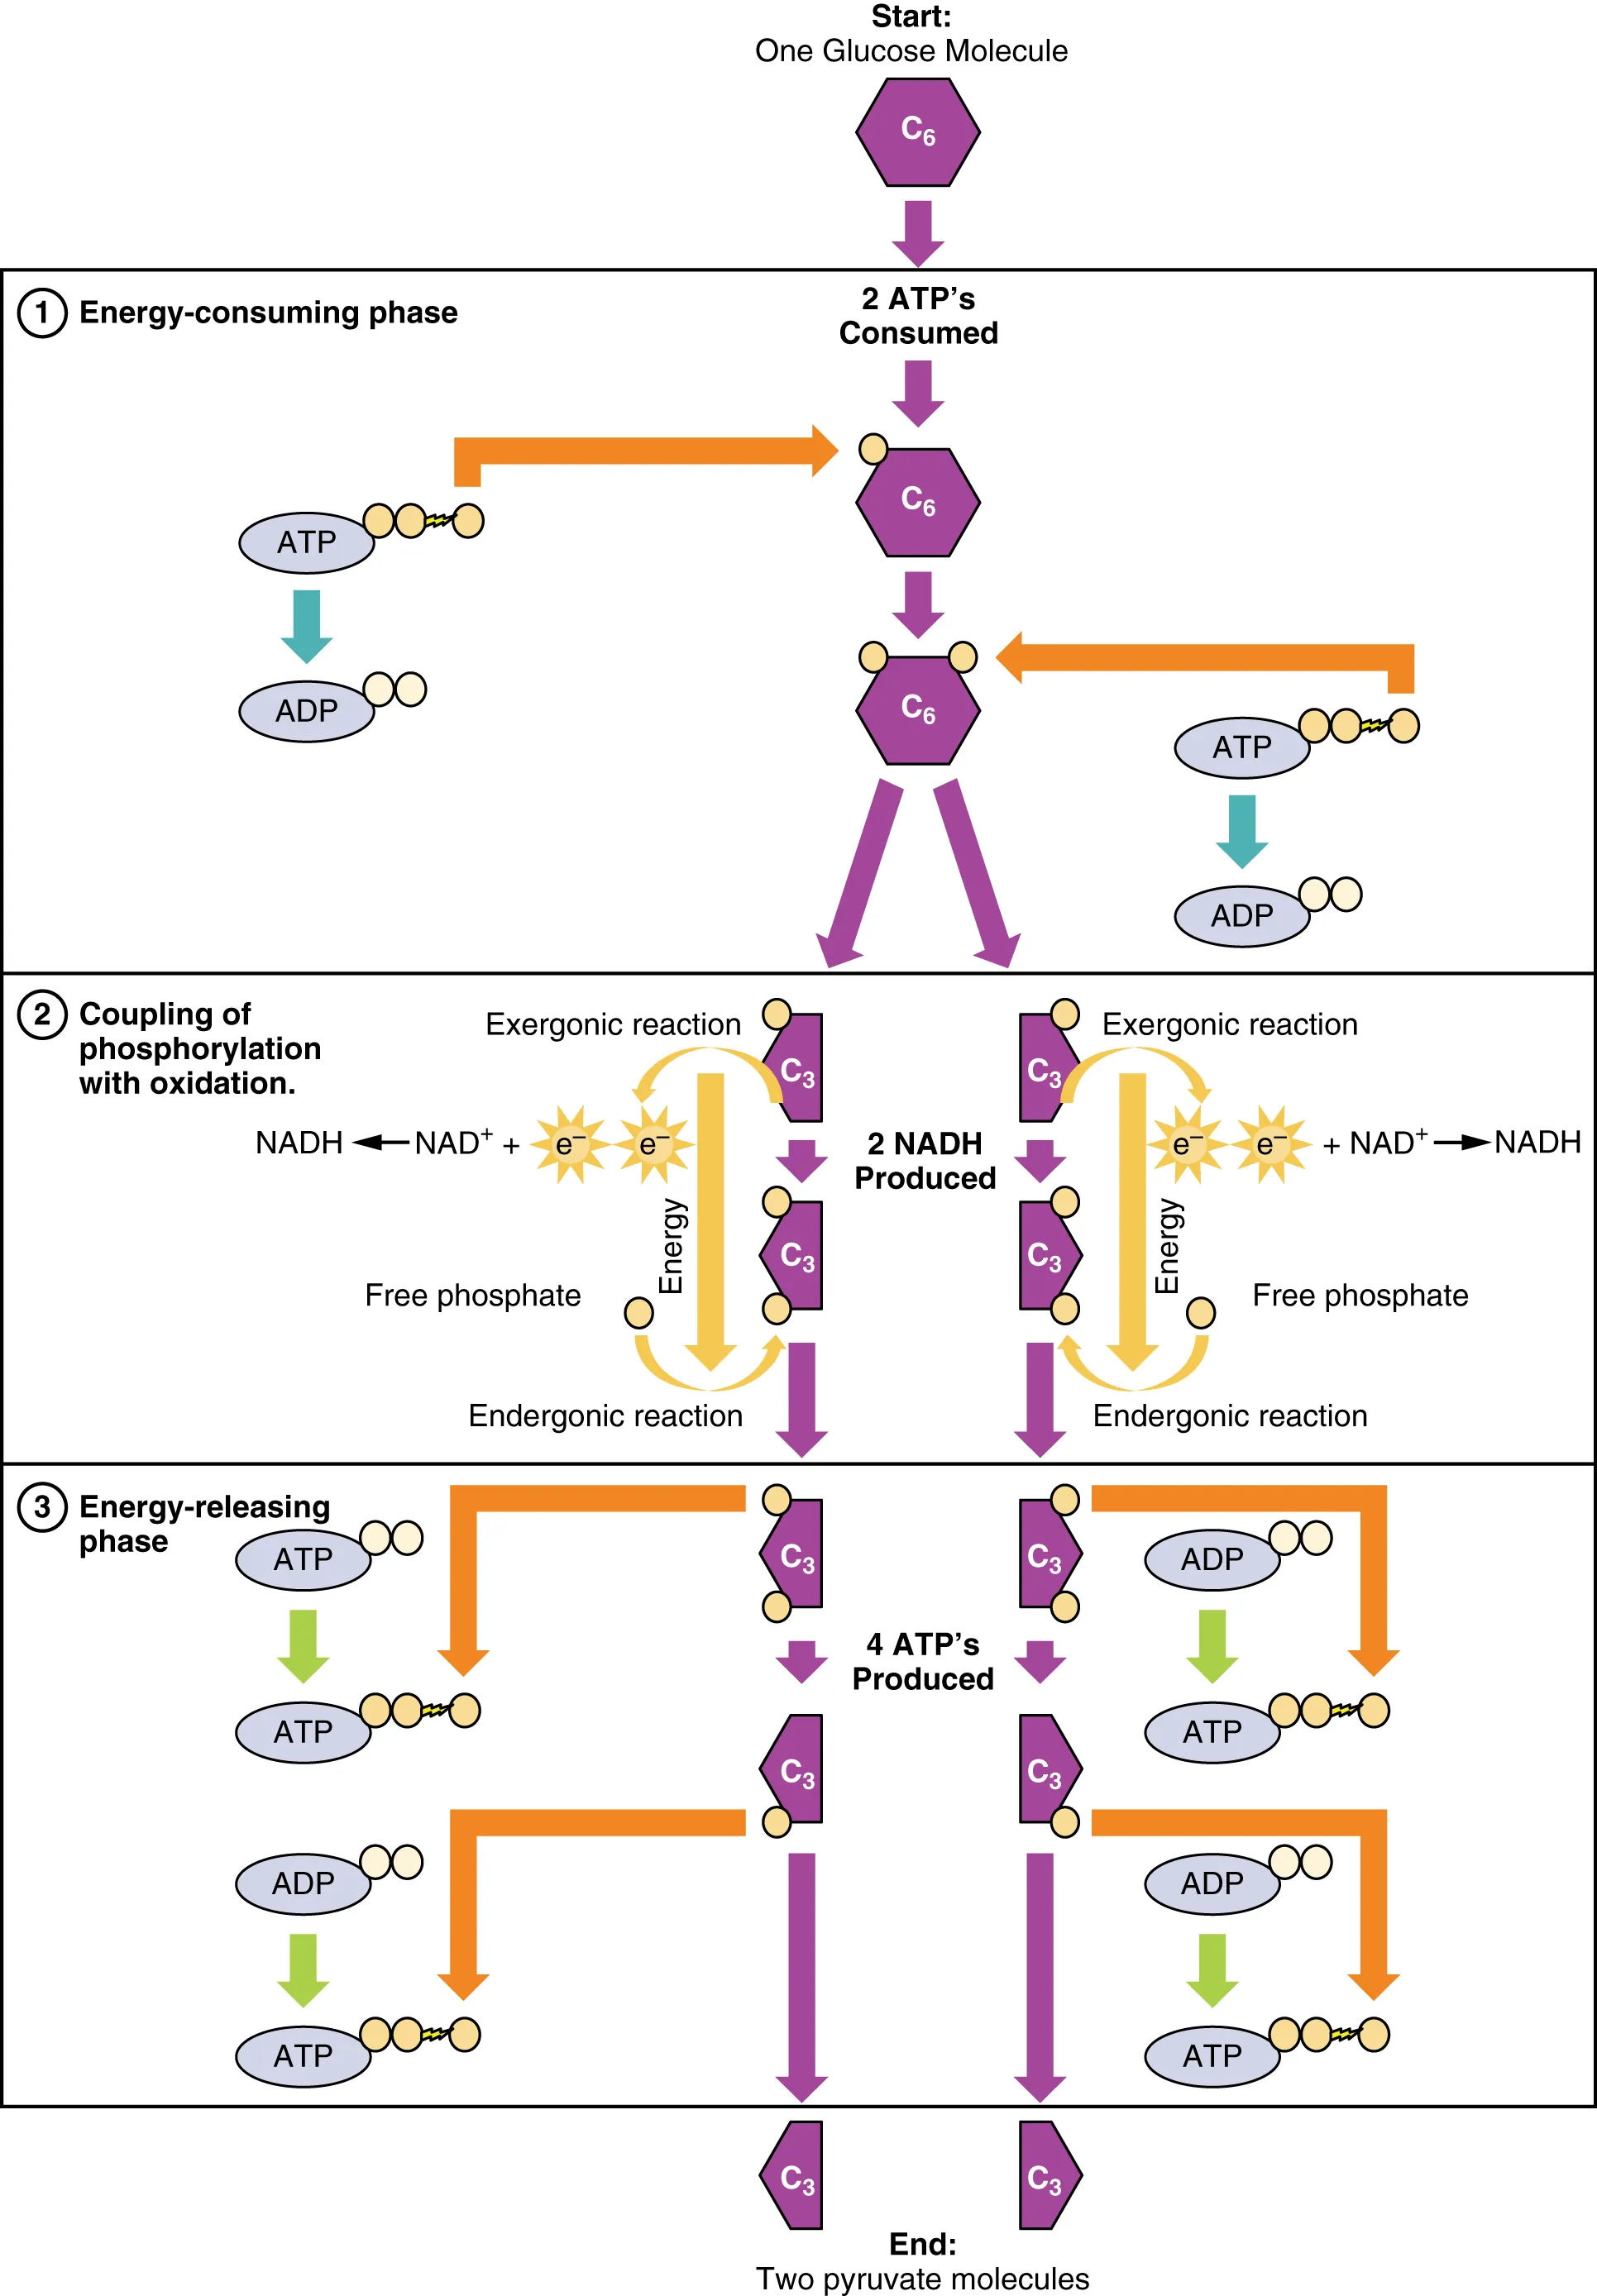 This flowchart shows the different steps in glycolysis in detail. The top panel shows the energy-consuming phase, the middle panel shows the coupling of phosphorylation with oxidation, and the bottom panel shows the energy-releasing phase.